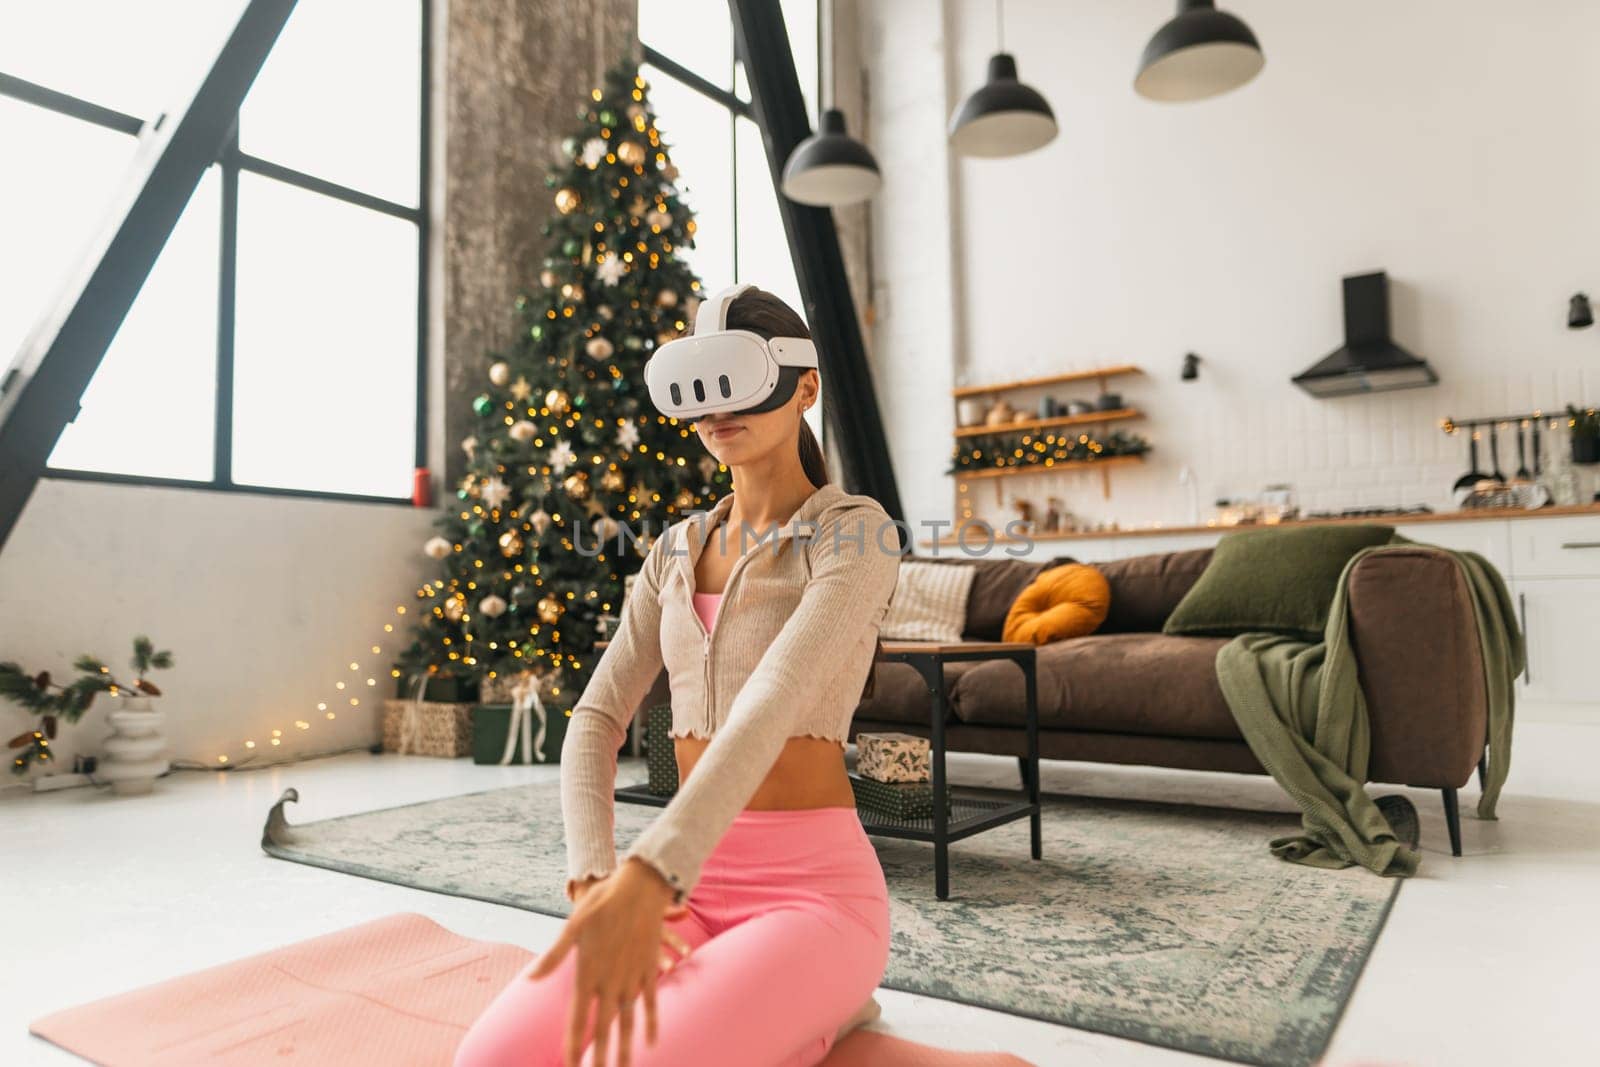 A young woman in pink sportswear practices yoga in a virtual reality headset against the backdrop of a Christmas tree. High quality photo